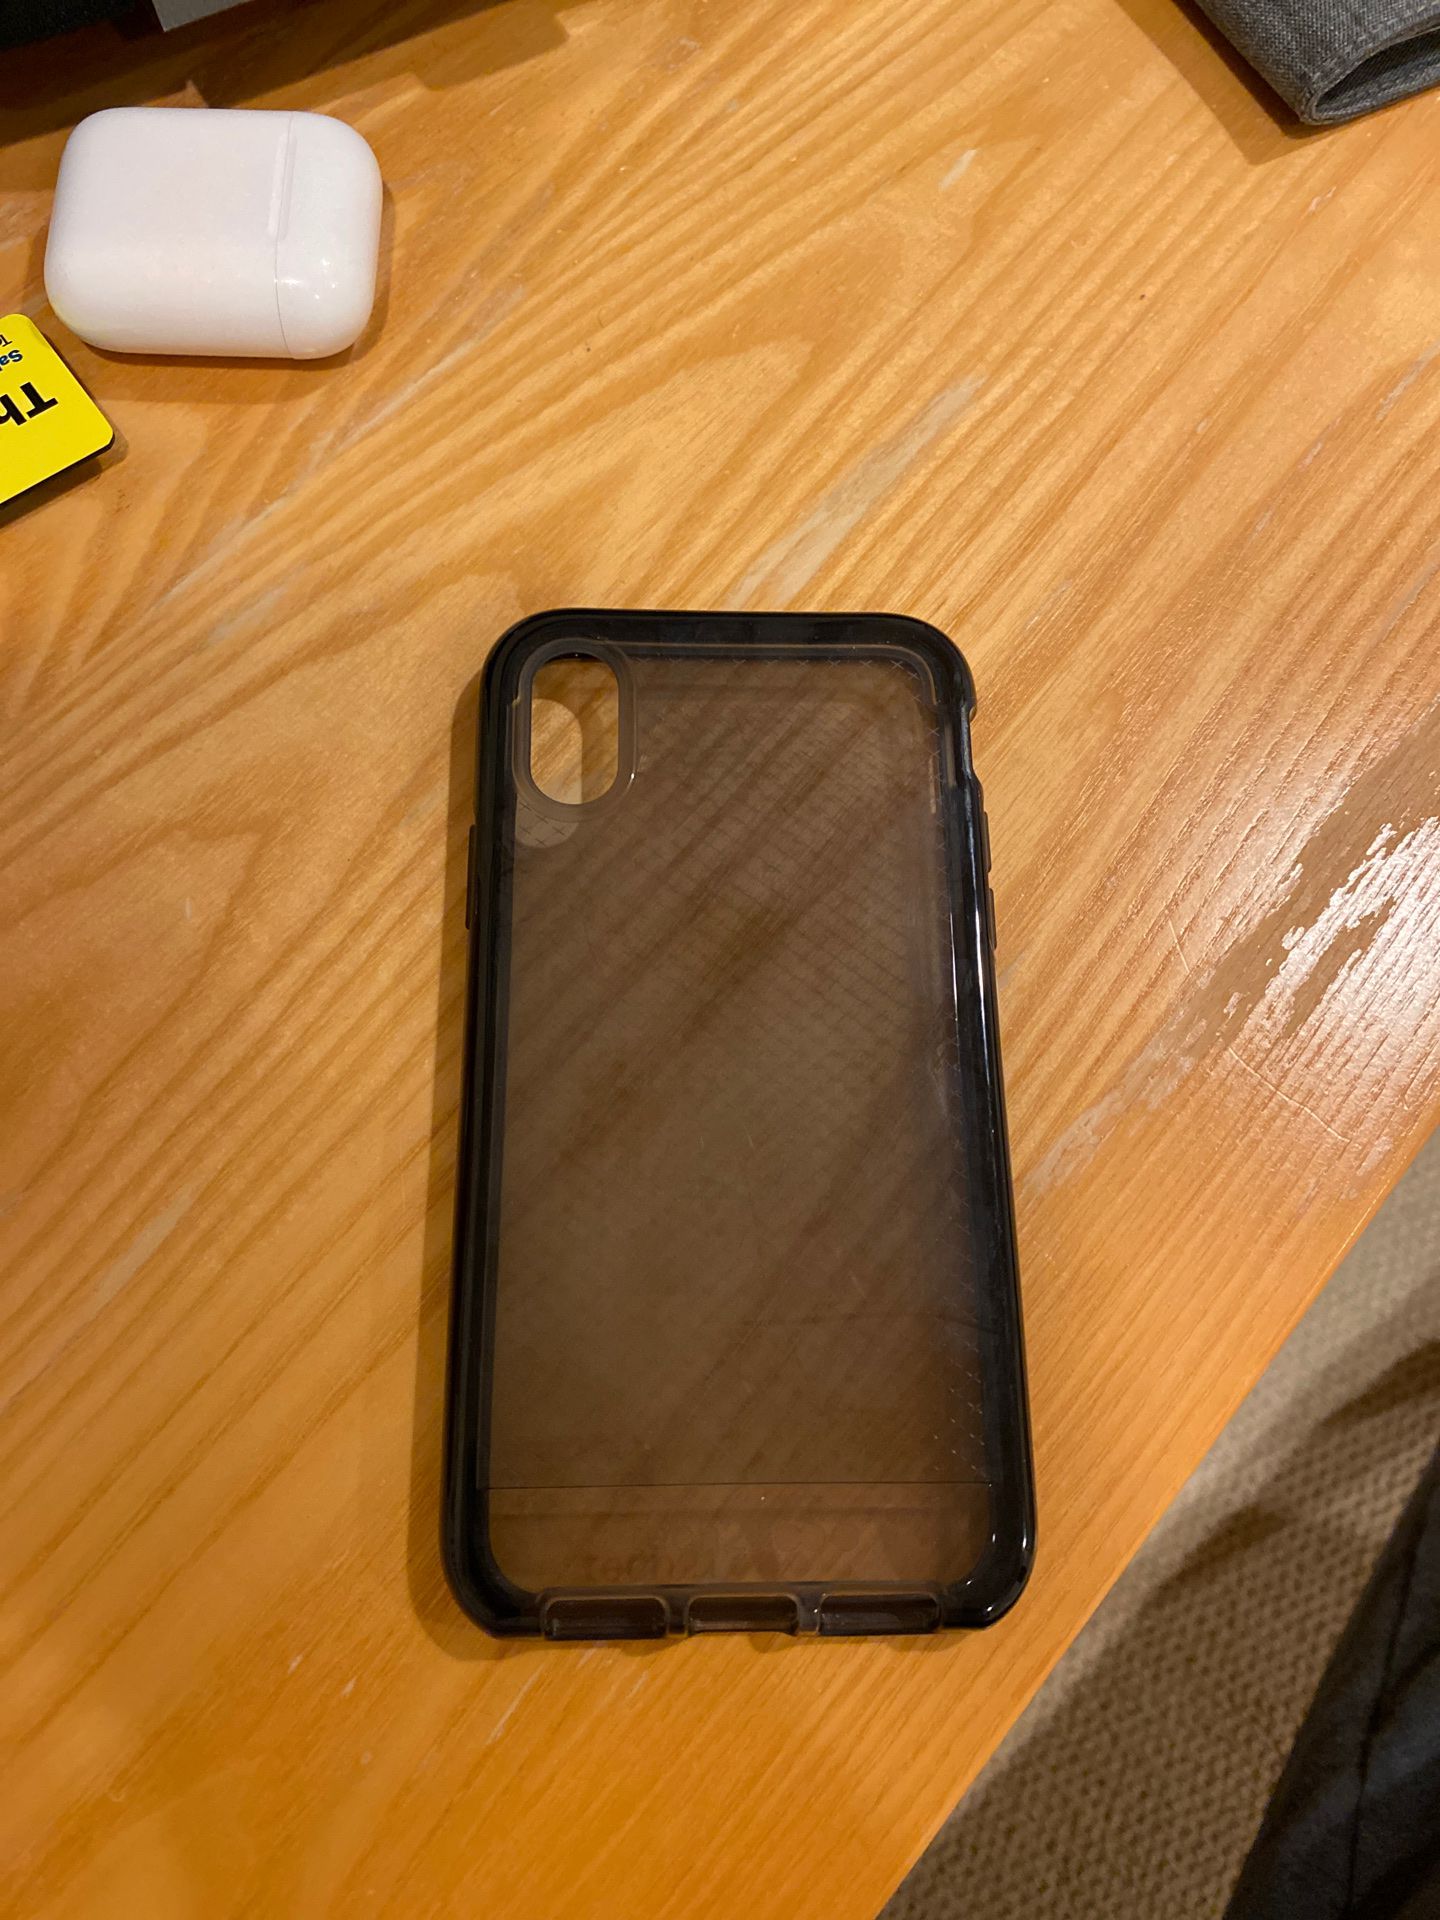 Tech 21 Evo Check case for iPhone X/XS